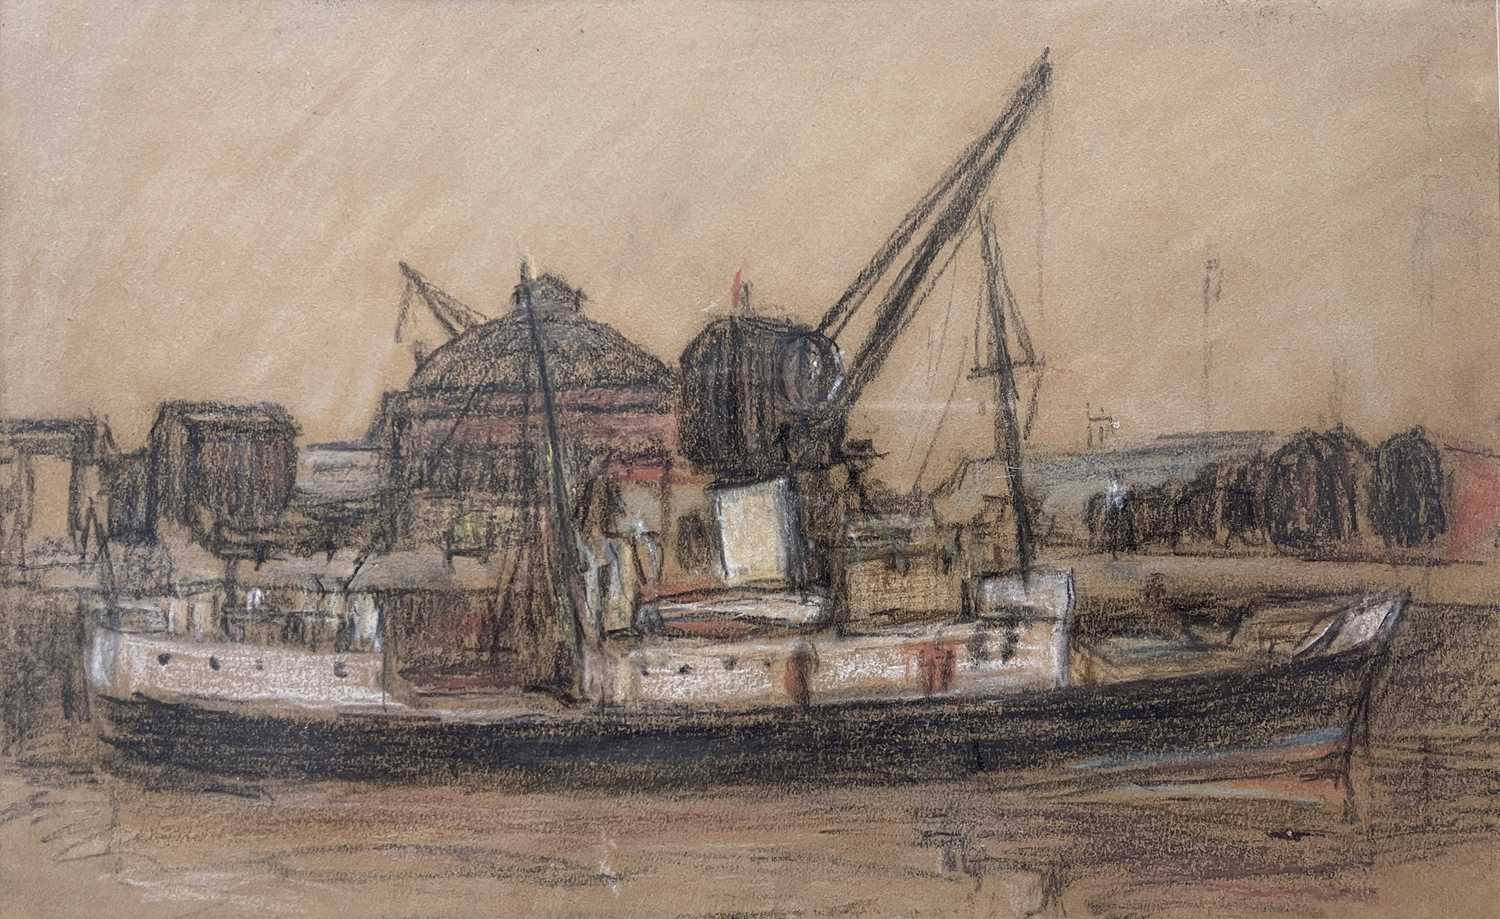 William Frederick Timmins (American, 1915-1985), 'Steamer on the Clyde', titled verso, pastel, 18 by